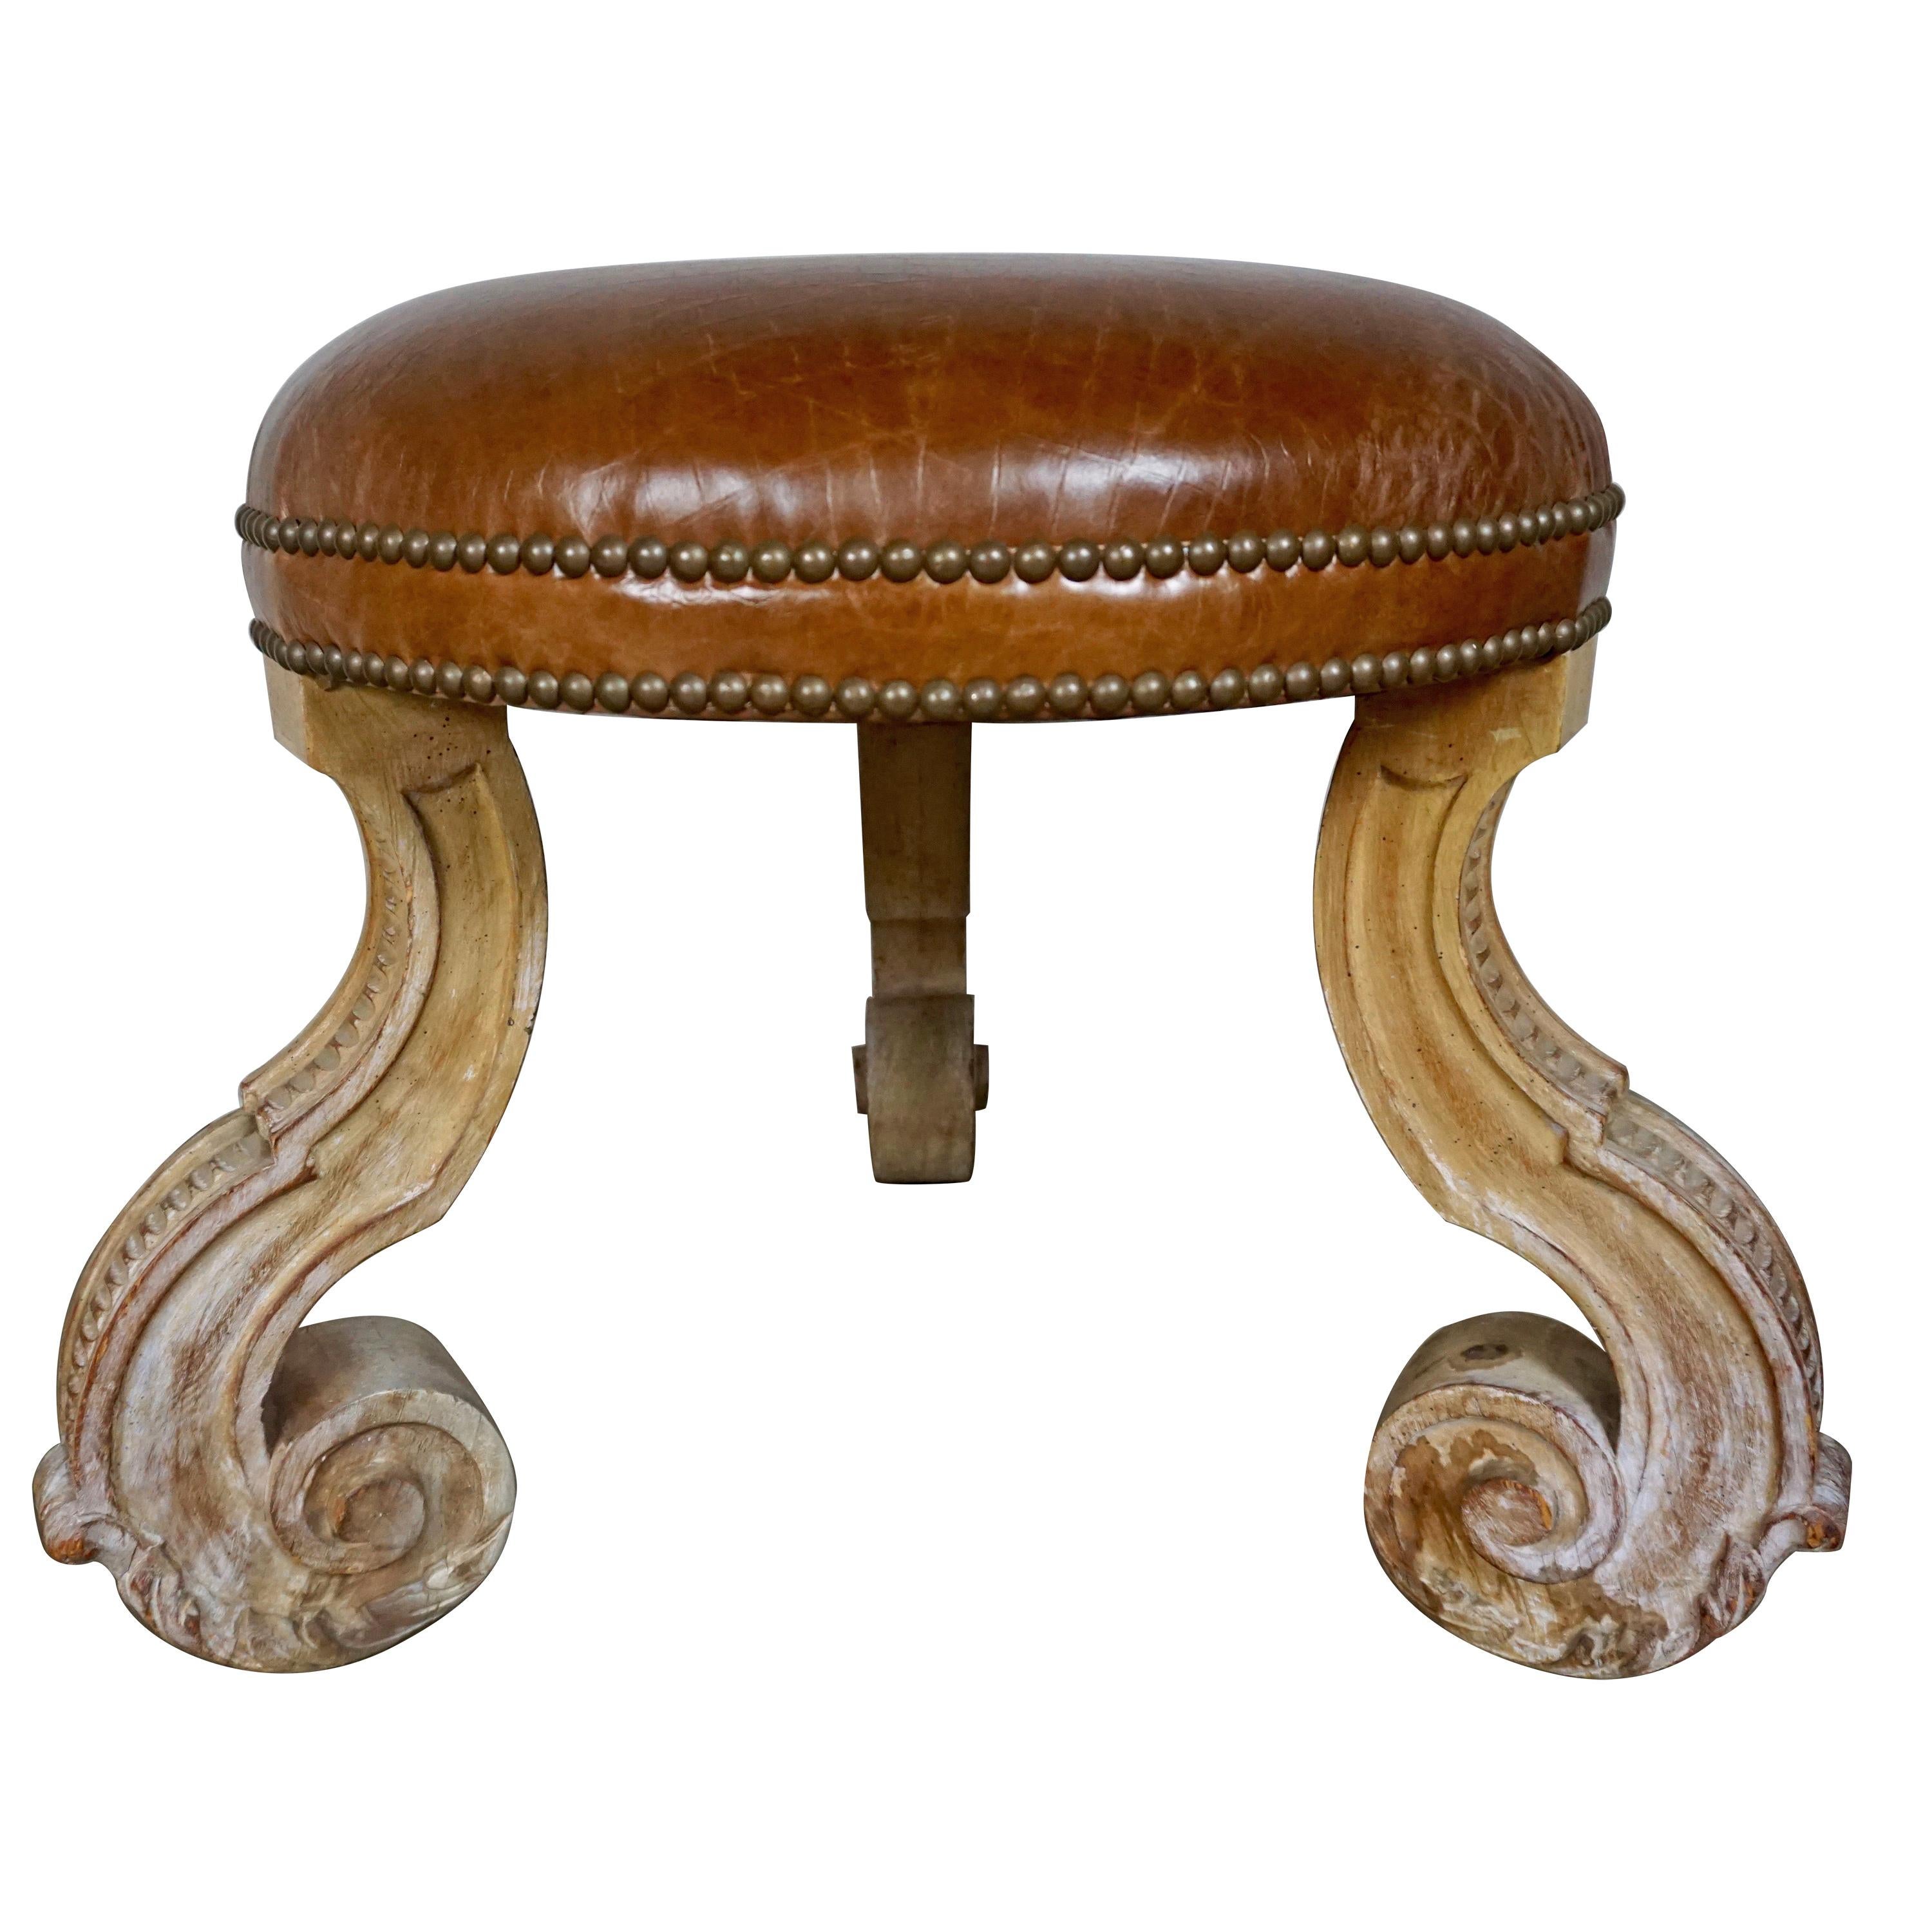 French Leather Upholstered Tripod Stool, circa 1930s